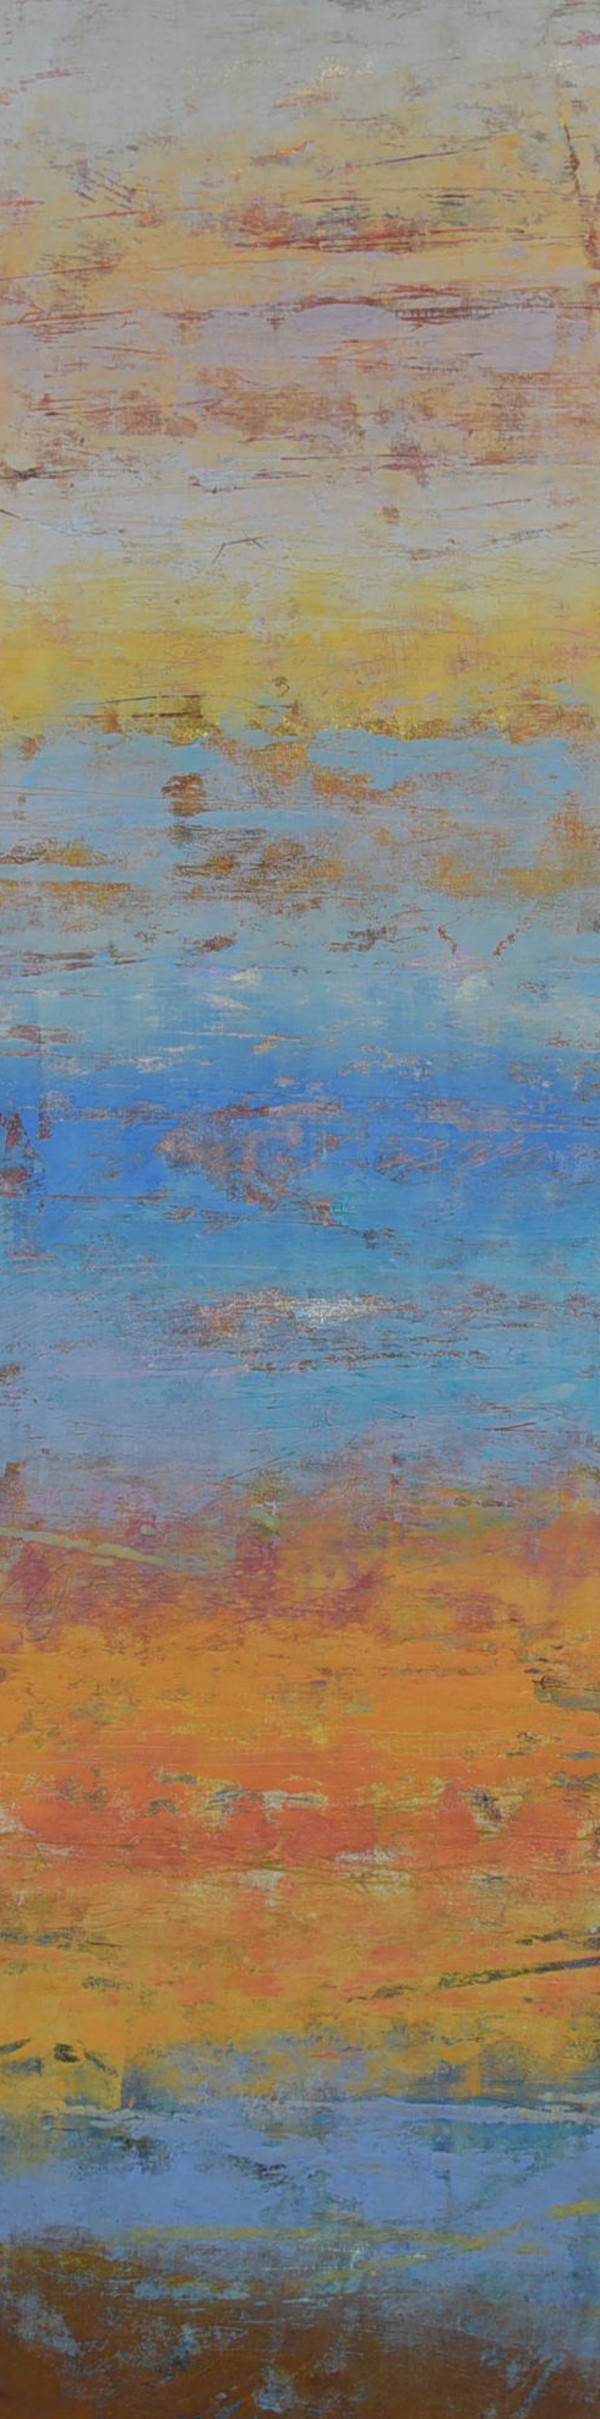 Taking My Time I, 48x12" by Ginnie Cappaert